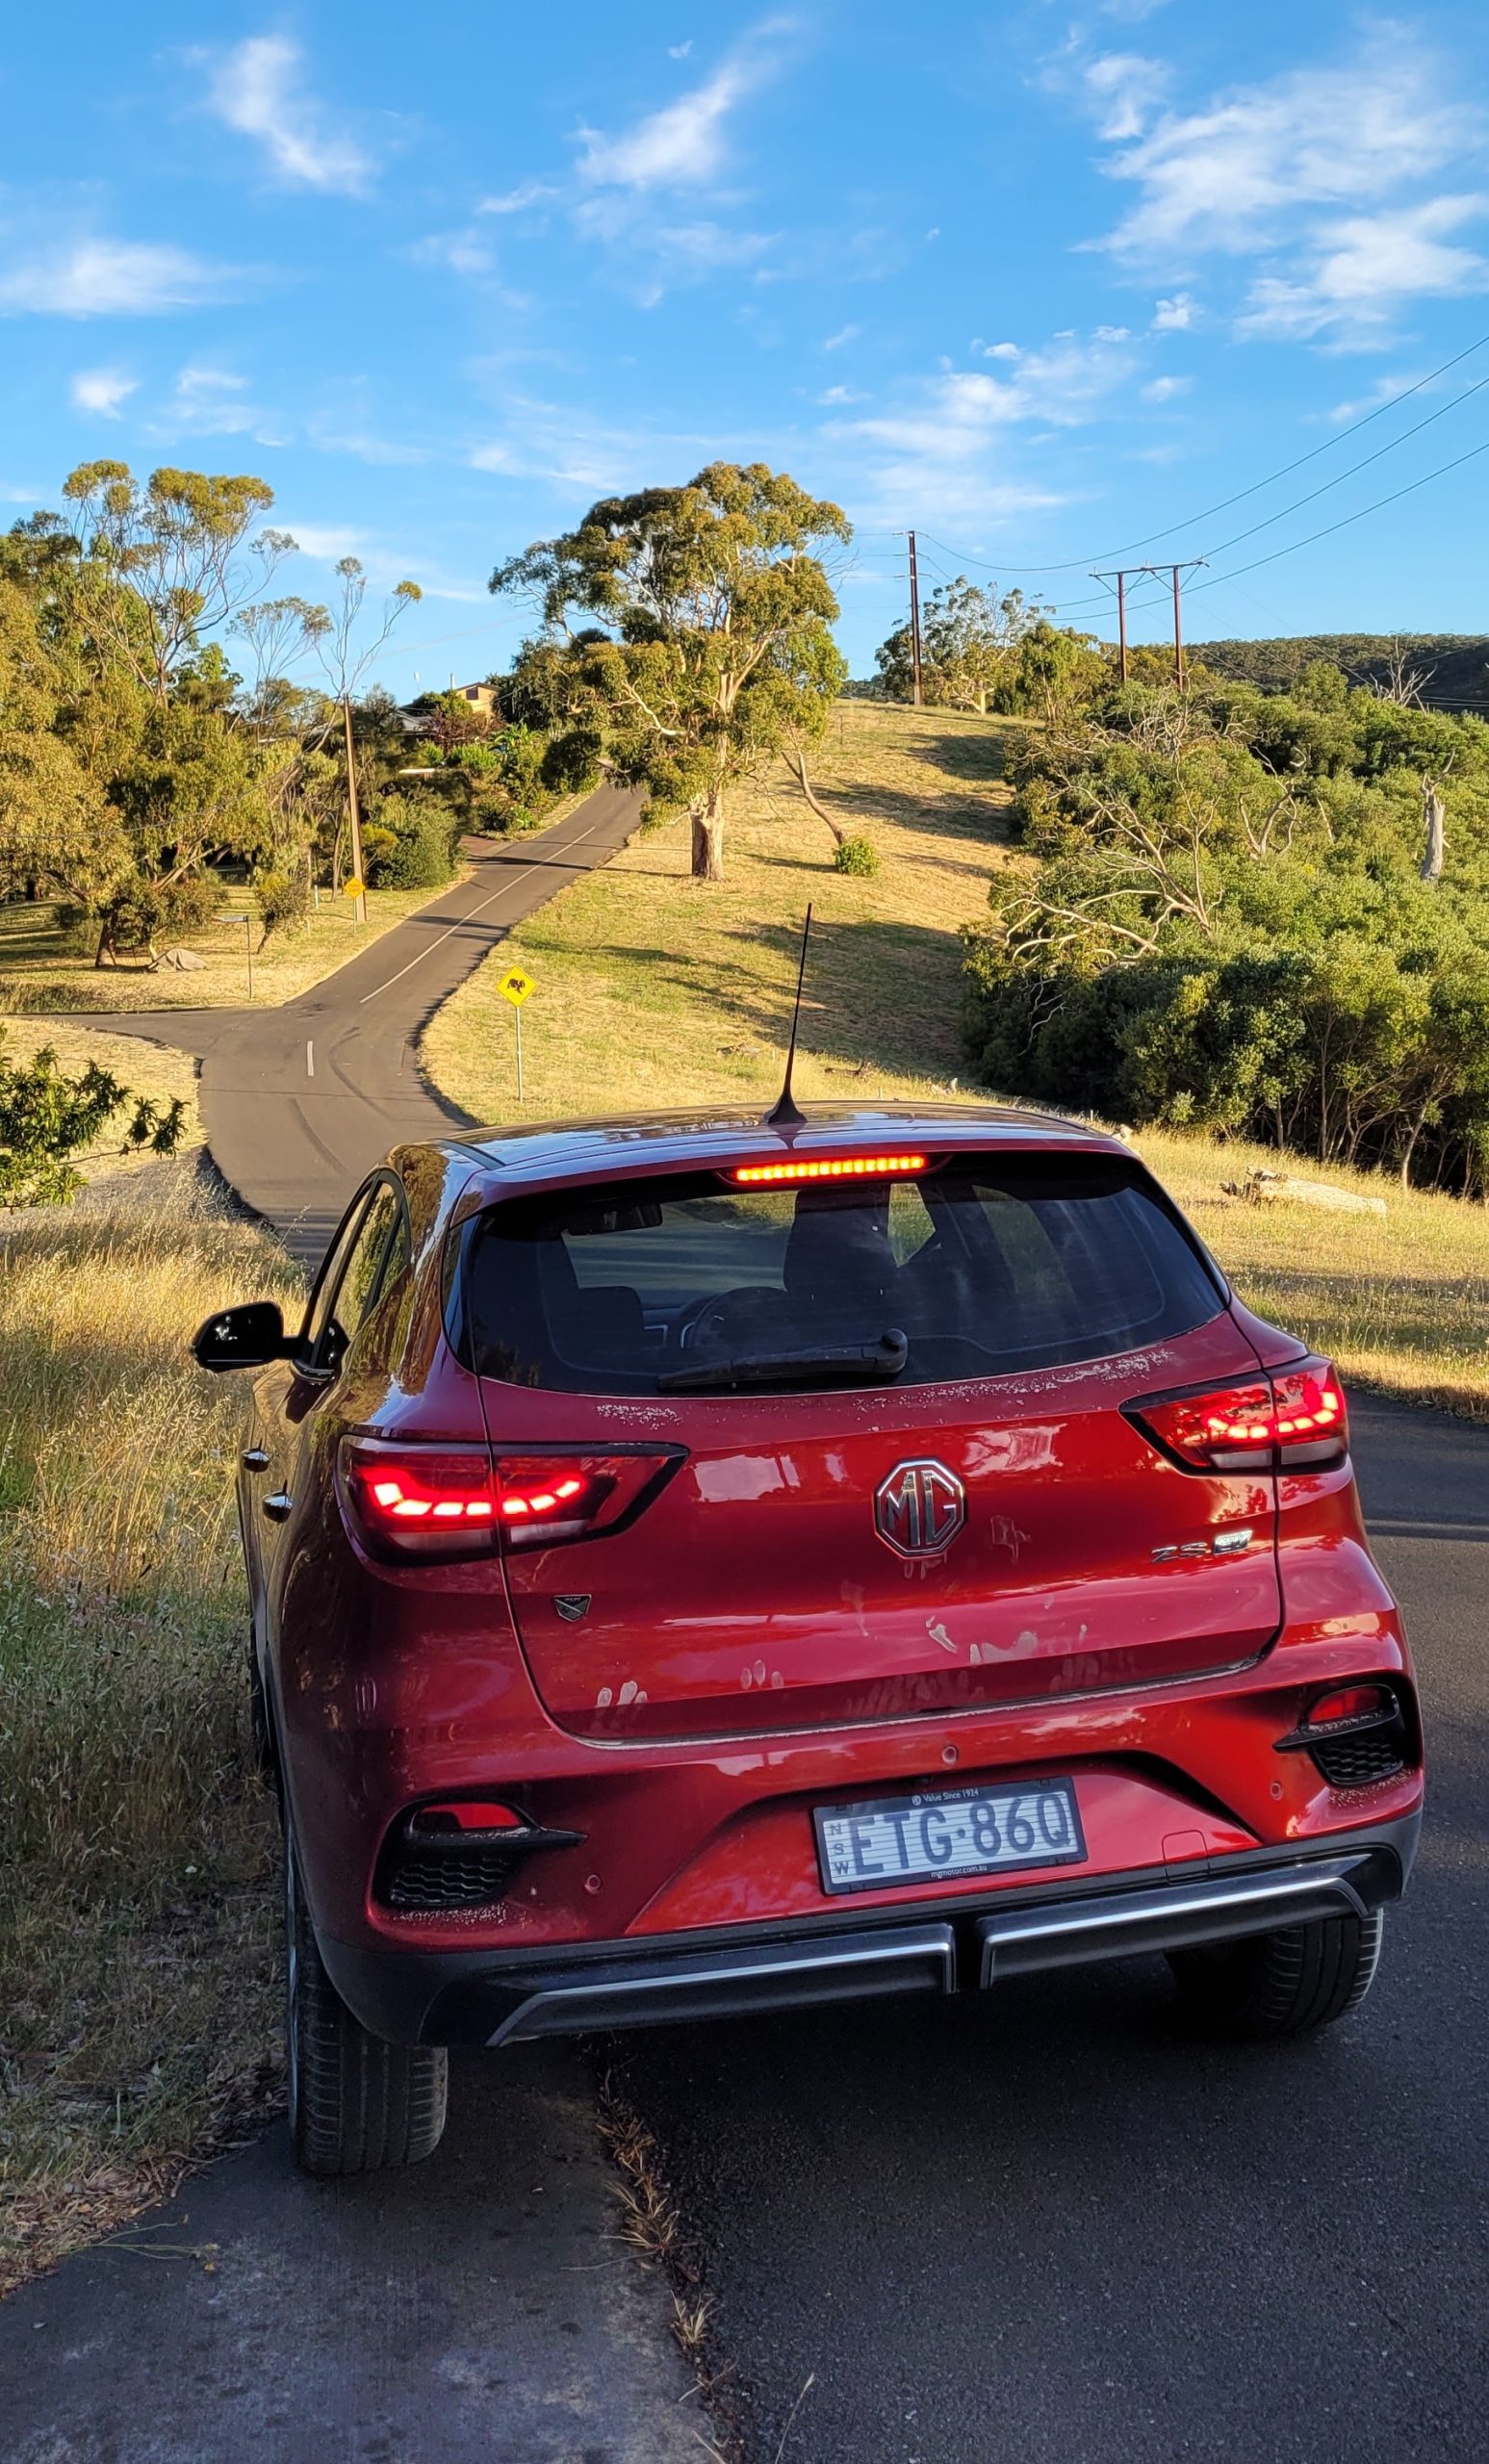 Diamond red metallic MG ZS EV rear view parked on country road in Adelaide hills